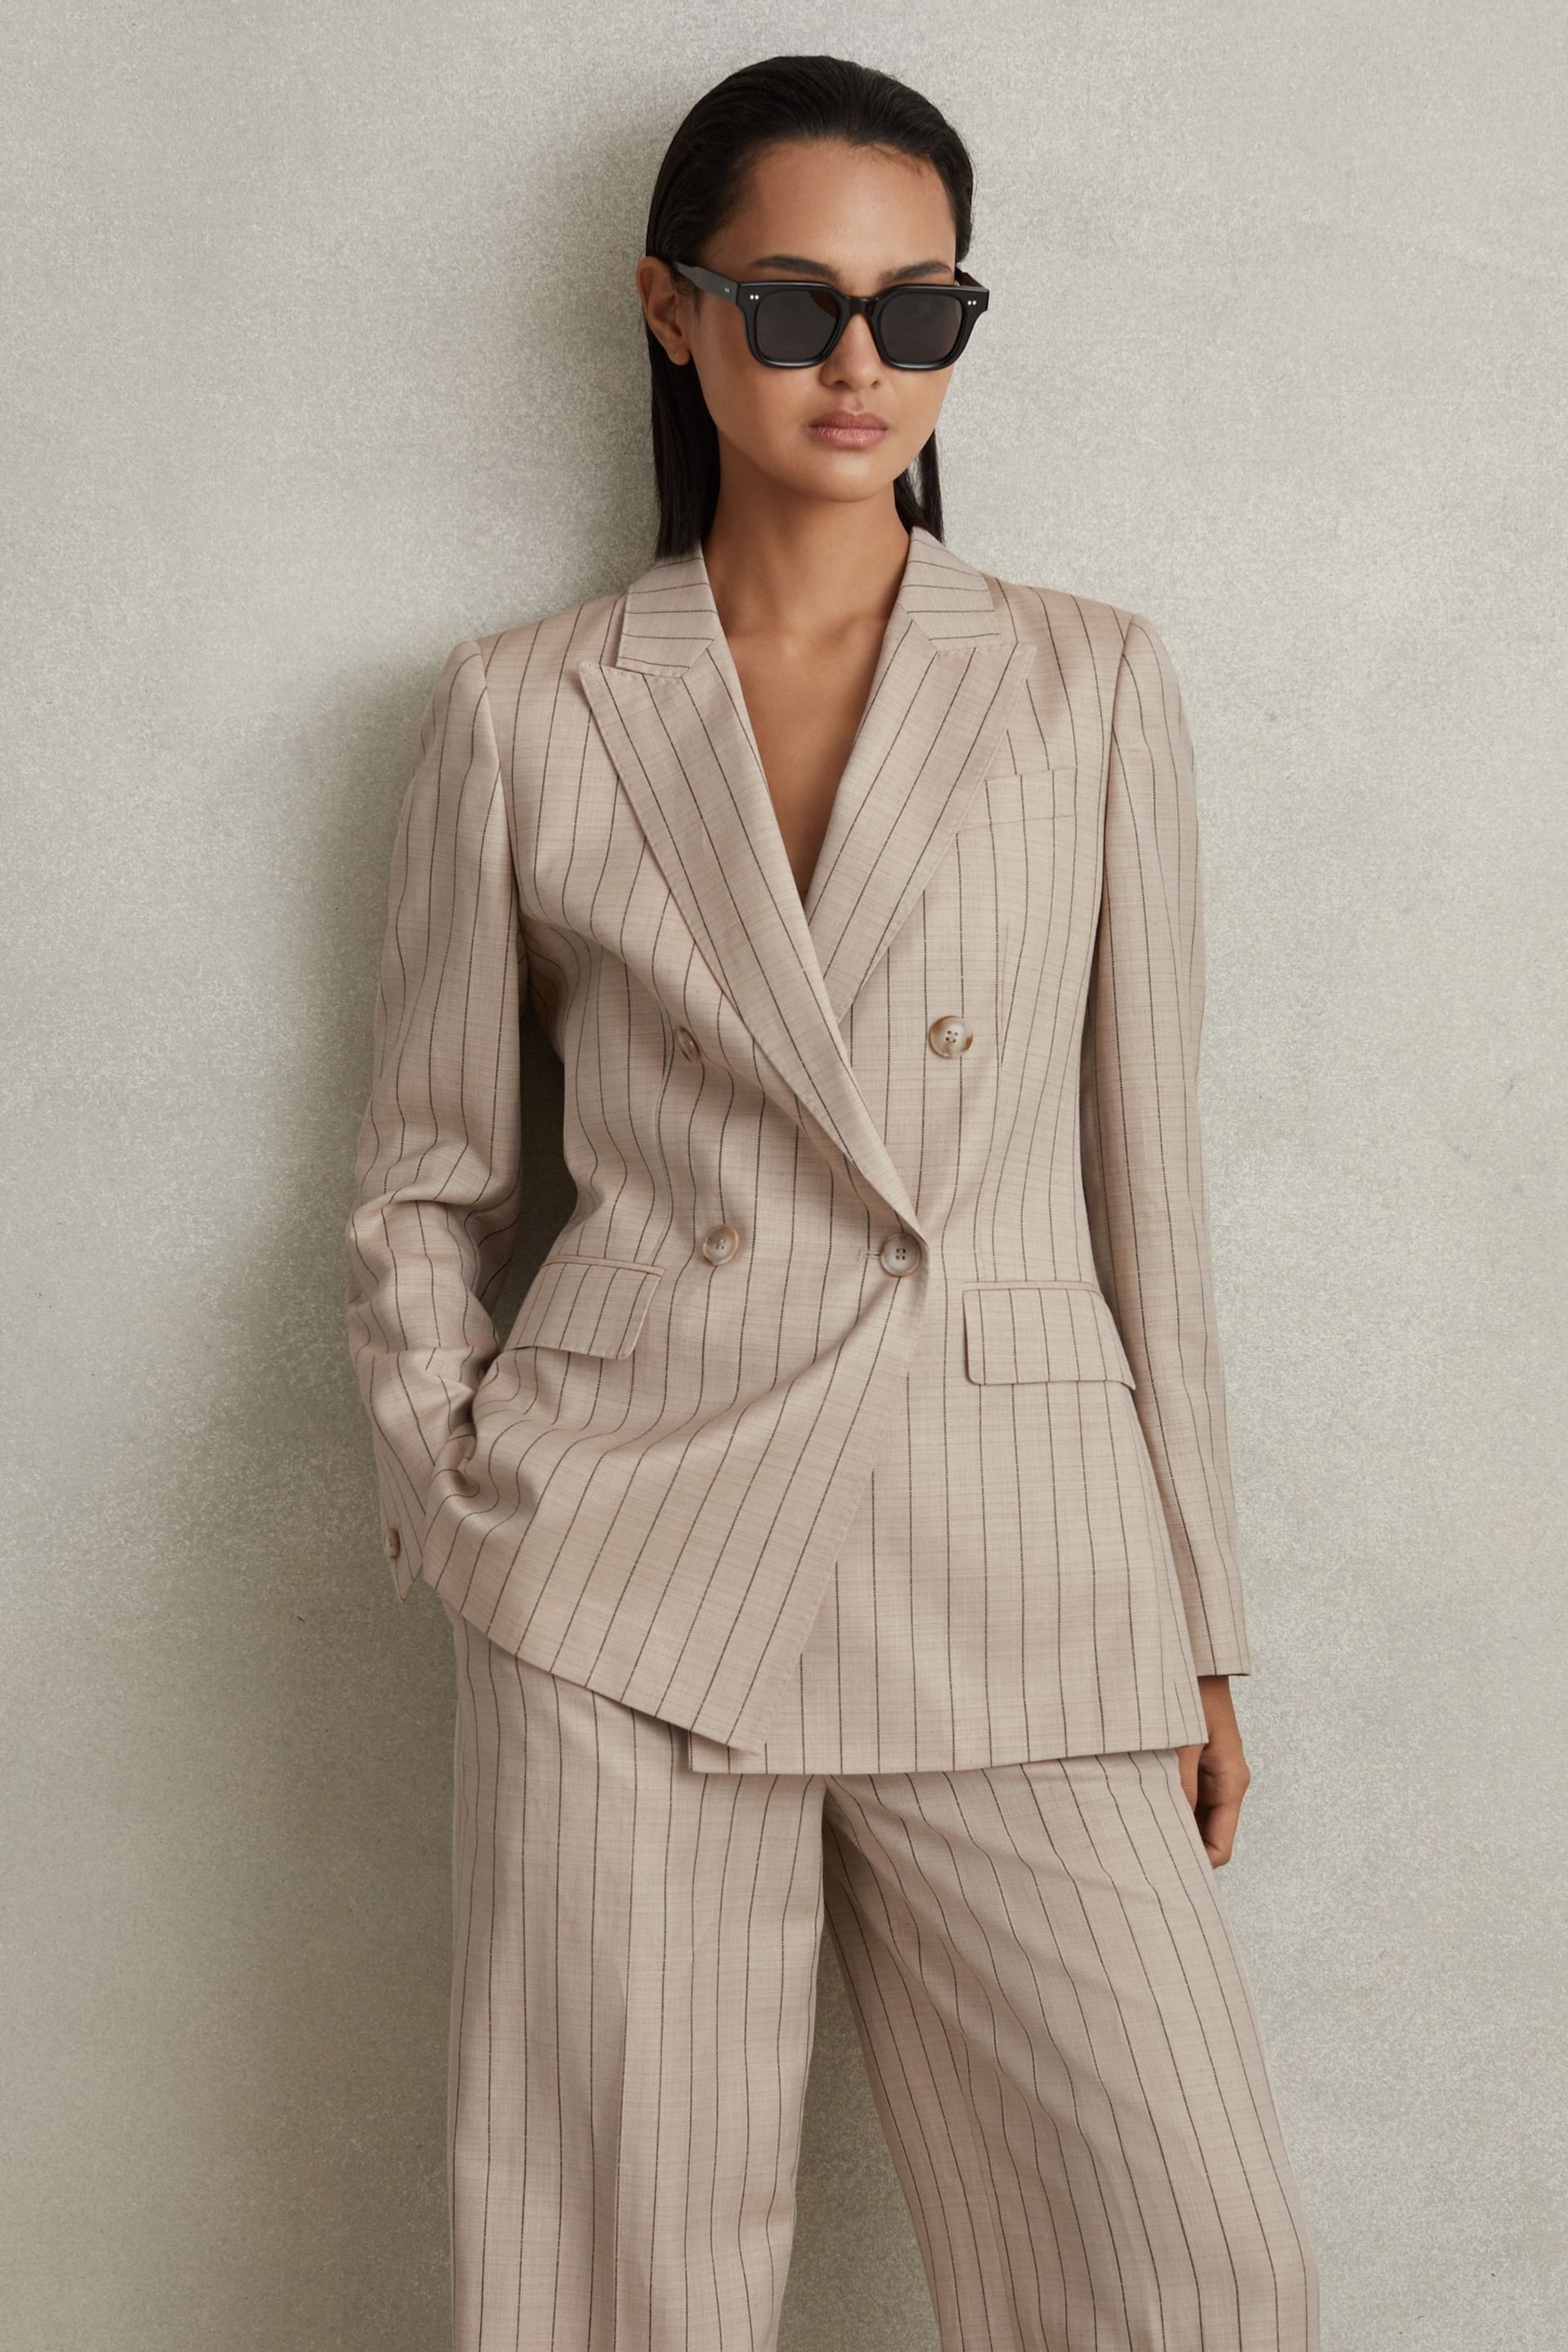 Reiss Neutral Odette Wool Blend Striped Double Breasted Blazer - Image 3 of 6